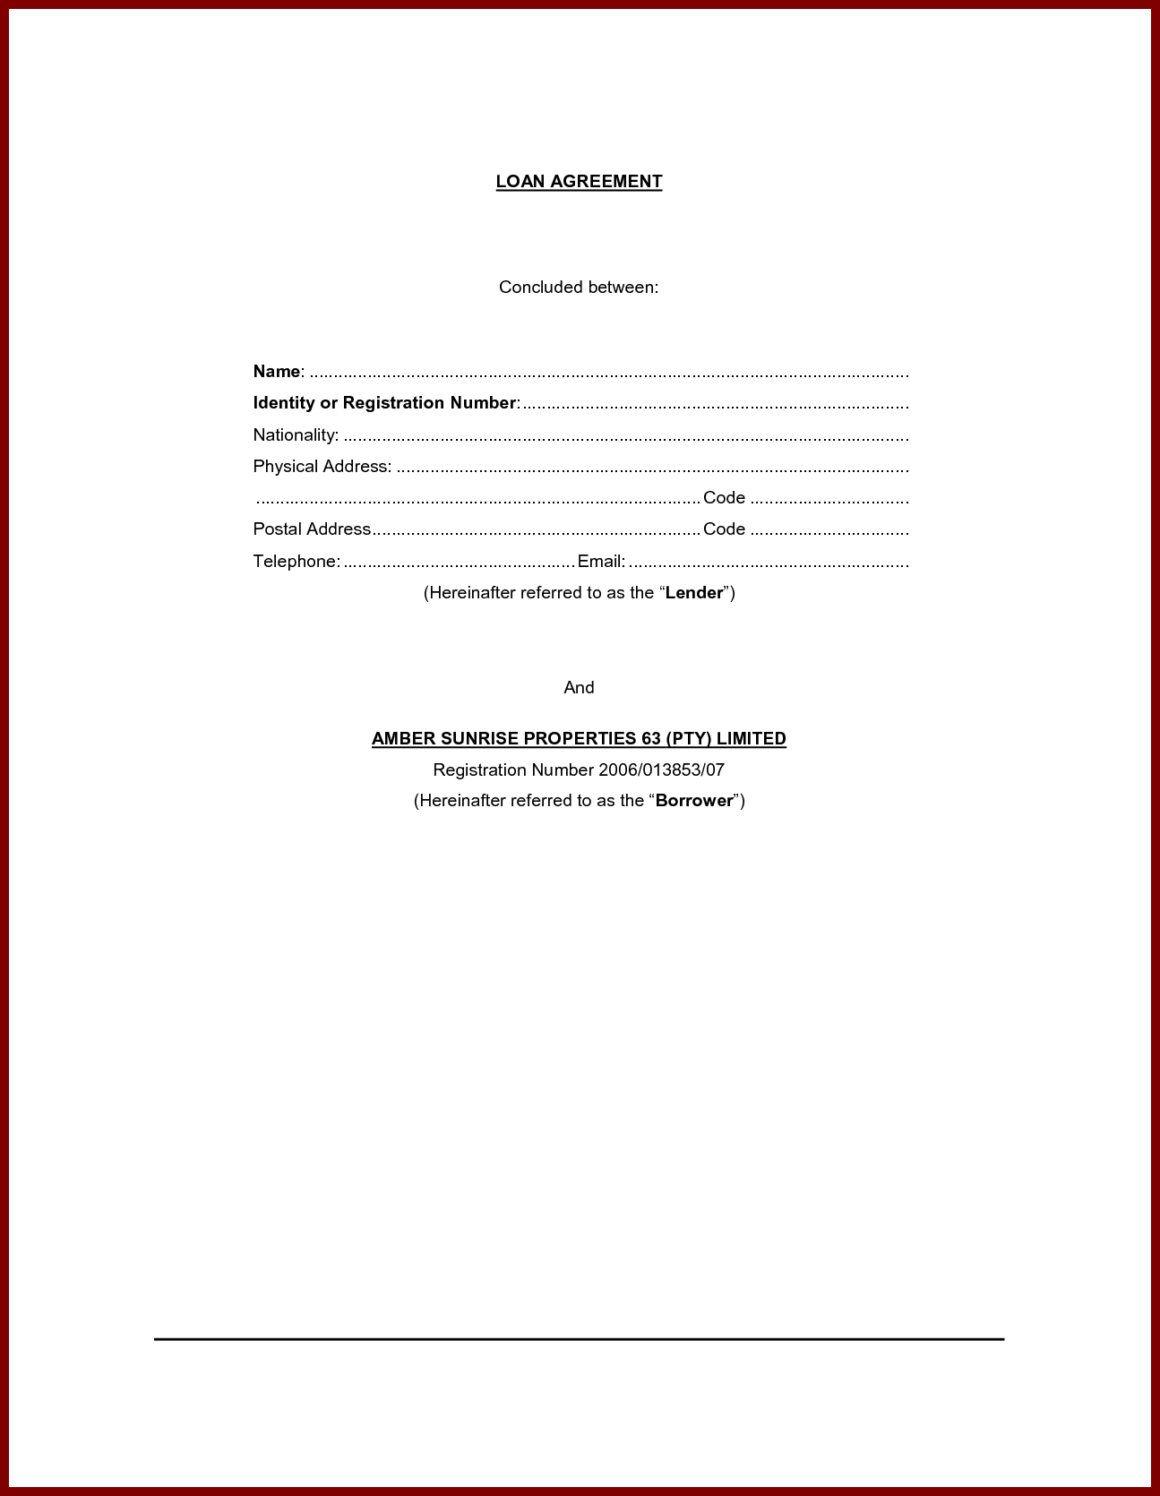 Personal Loan Contract Or Agreement Form Sample : Vientazona Pertaining To Blank Loan Agreement Template